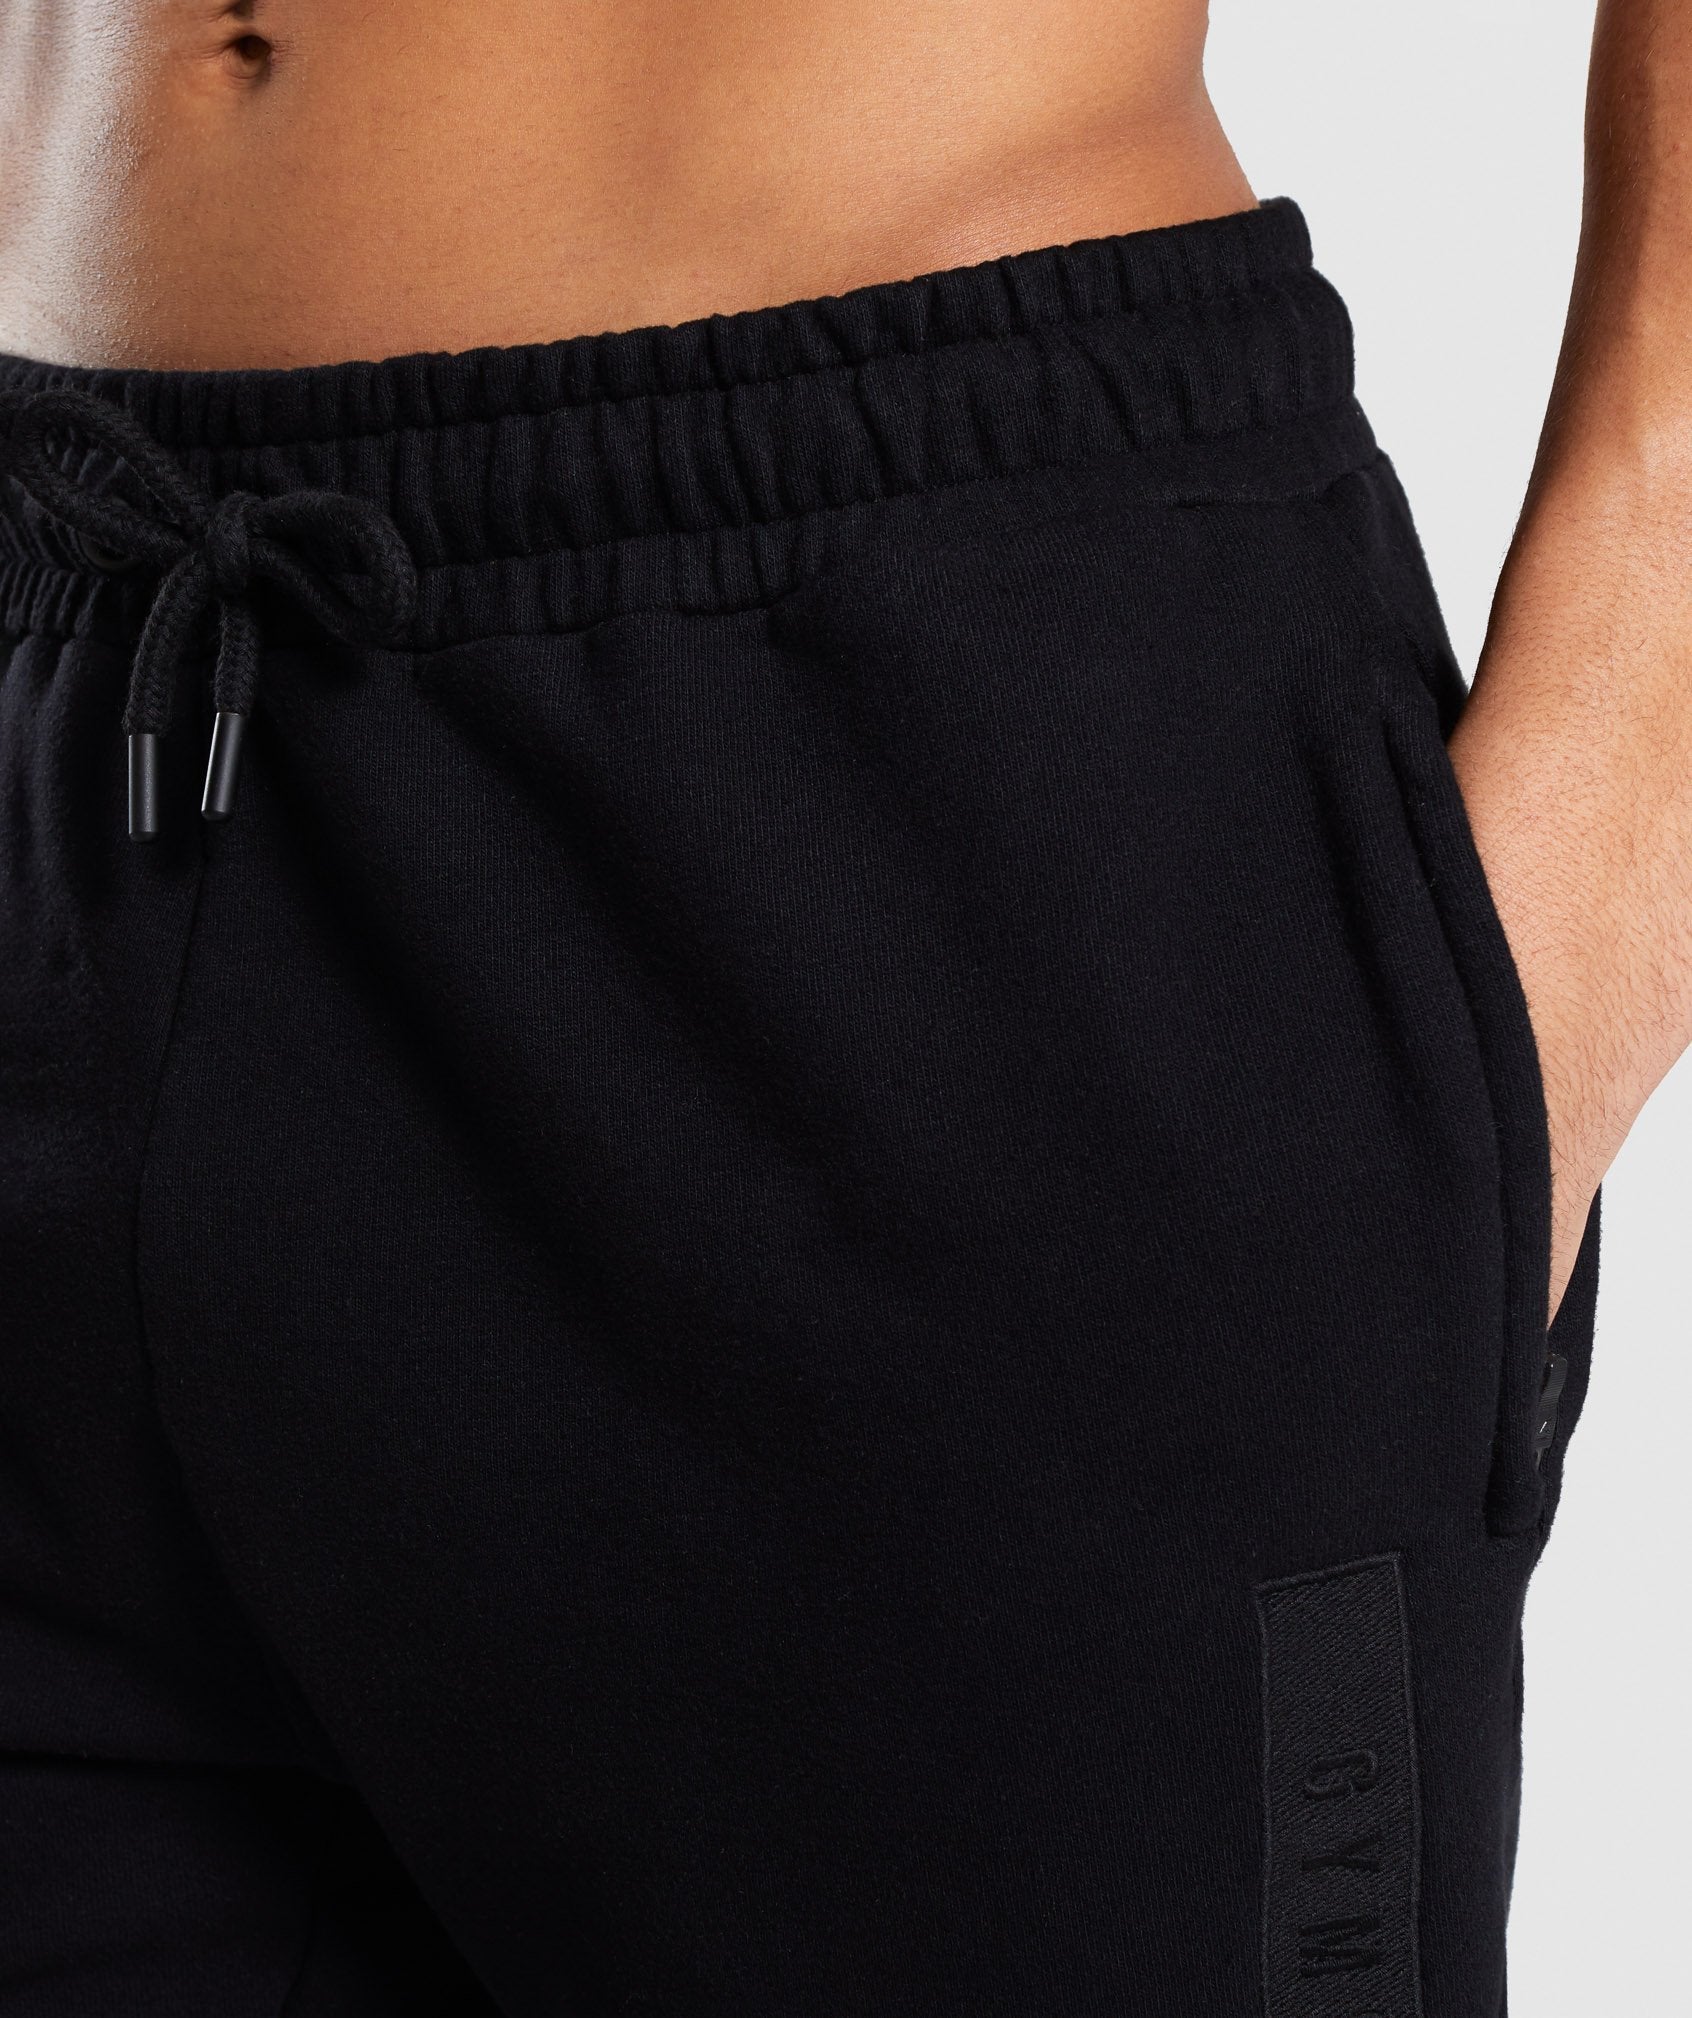 Crucial Shorts in Black - view 6